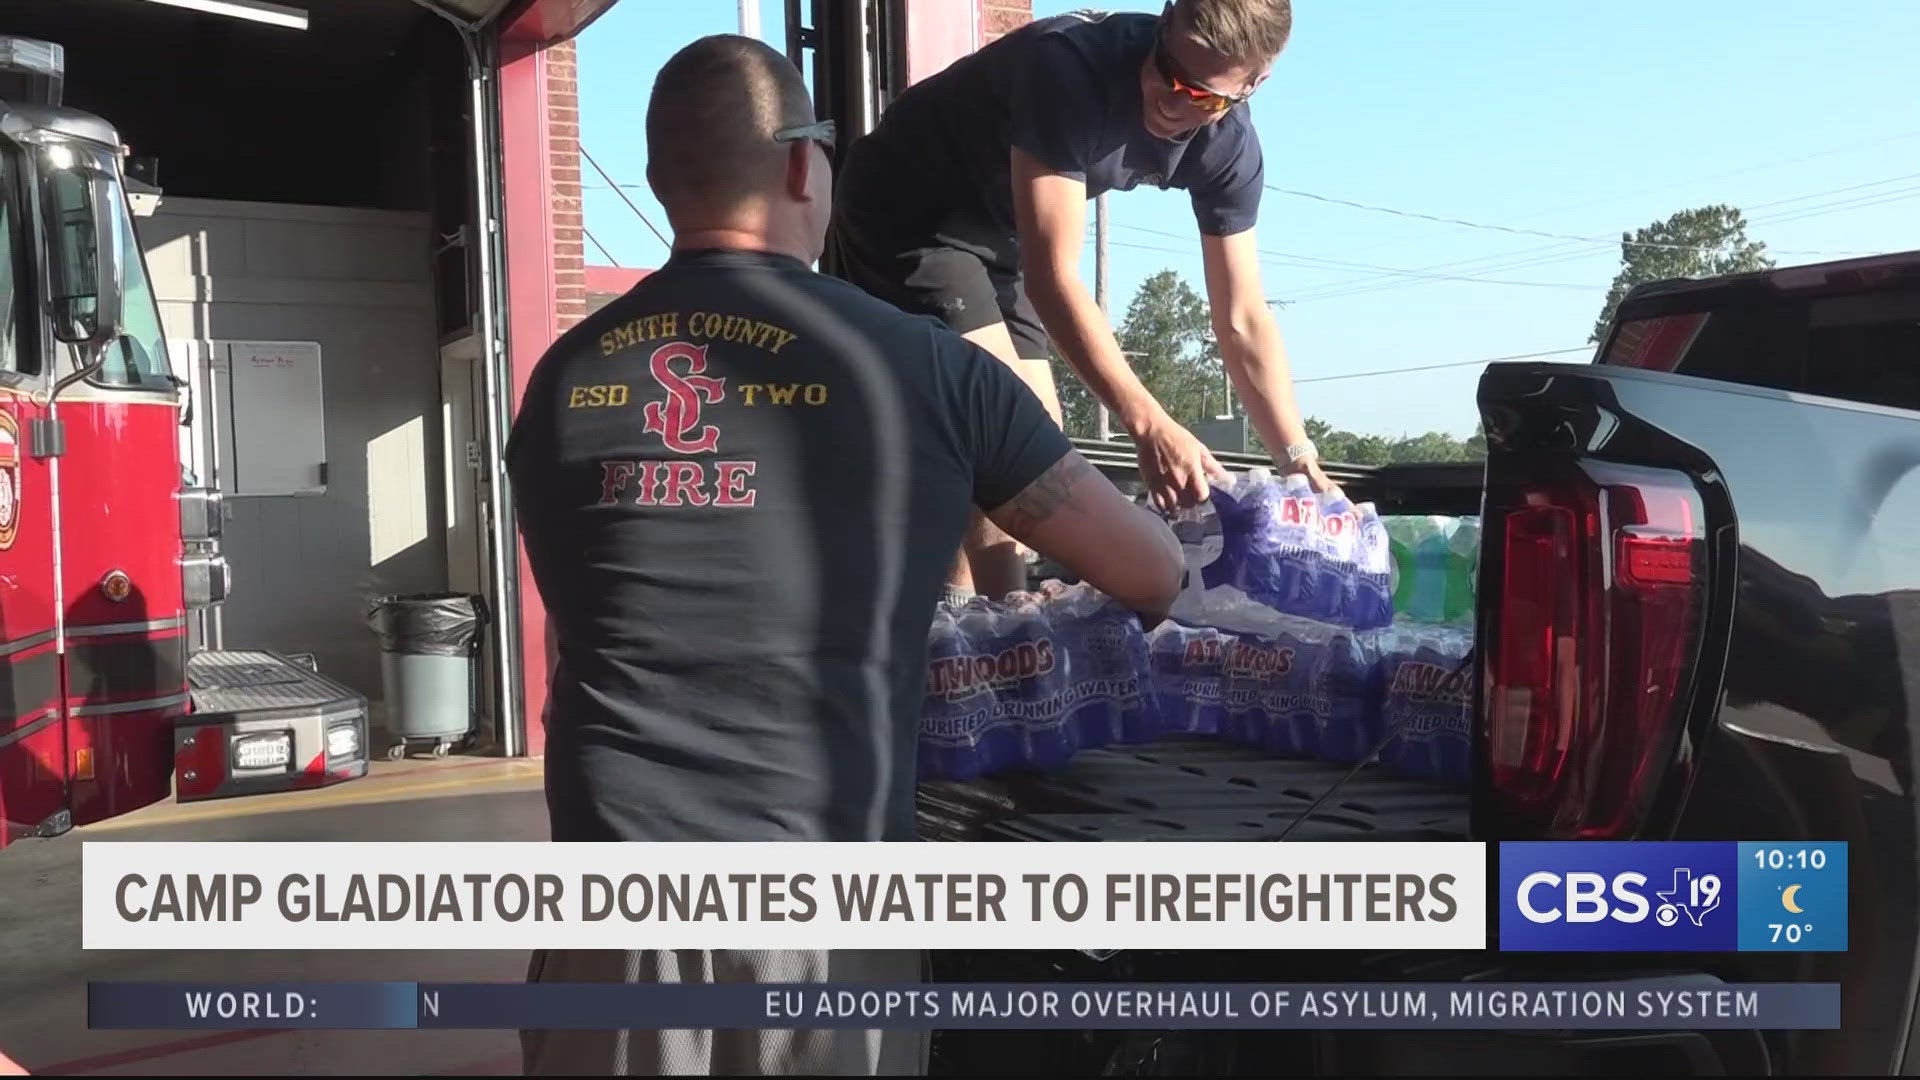 Camp Gladiator donated water to firefighters across East Texas in hopes to help them during the summer months.